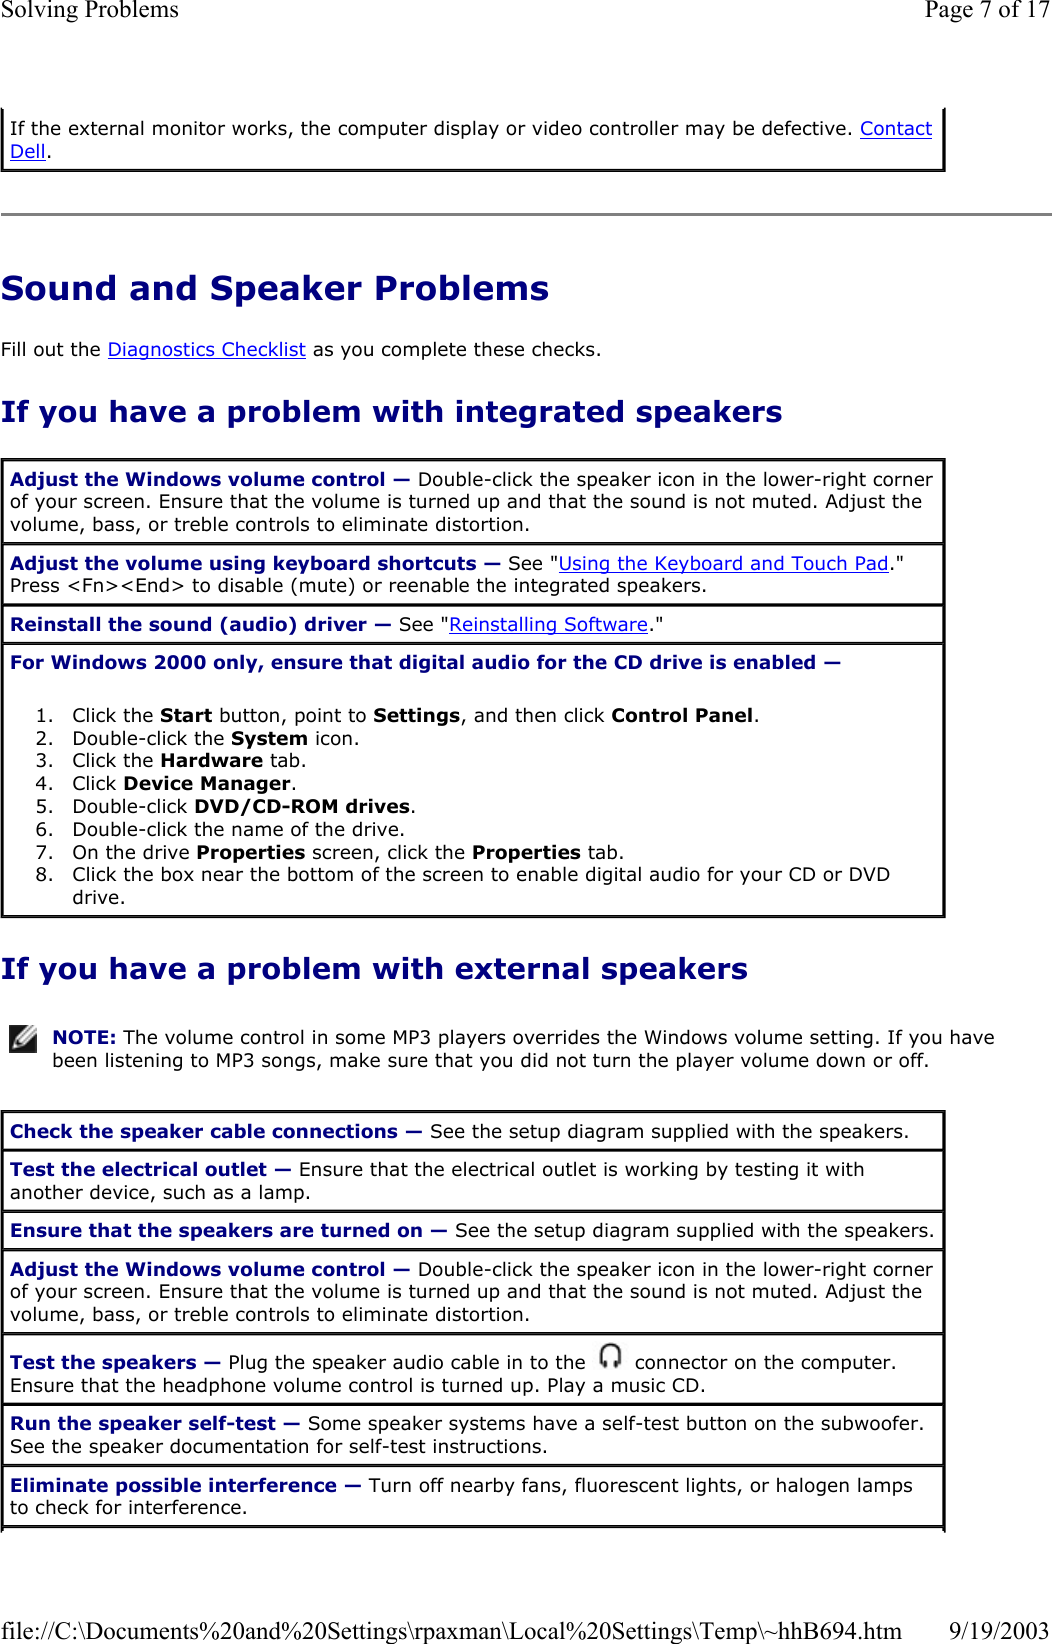 Sound and Speaker Problems Fill out the Diagnostics Checklist as you complete these checks. If you have a problem with integrated speakers If you have a problem with external speakers If the external monitor works, the computer display or video controller may be defective. Contact Dell. Adjust the Windows volume control — Double-click the speaker icon in the lower-right corner of your screen. Ensure that the volume is turned up and that the sound is not muted. Adjust the volume, bass, or treble controls to eliminate distortion. Adjust the volume using keyboard shortcuts — See &quot;Using the Keyboard and Touch Pad.&quot; Press &lt;Fn&gt;&lt;End&gt; to disable (mute) or reenable the integrated speakers. Reinstall the sound (audio) driver — See &quot;Reinstalling Software.&quot; For Windows 2000 only, ensure that digital audio for the CD drive is enabled —  1. Click the Start button, point to Settings, and then click Control Panel.  2. Double-click the System icon.  3. Click the Hardware tab.  4. Click Device Manager.  5. Double-click DVD/CD-ROM drives.  6. Double-click the name of the drive.  7. On the drive Properties screen, click the Properties tab.  8. Click the box near the bottom of the screen to enable digital audio for your CD or DVD drive.  NOTE: The volume control in some MP3 players overrides the Windows volume setting. If you have been listening to MP3 songs, make sure that you did not turn the player volume down or off.Check the speaker cable connections — See the setup diagram supplied with the speakers. Test the electrical outlet — Ensure that the electrical outlet is working by testing it with another device, such as a lamp. Ensure that the speakers are turned on — See the setup diagram supplied with the speakers. Adjust the Windows volume control — Double-click the speaker icon in the lower-right corner of your screen. Ensure that the volume is turned up and that the sound is not muted. Adjust the volume, bass, or treble controls to eliminate distortion. Test the speakers — Plug the speaker audio cable in to the   connector on the computer. Ensure that the headphone volume control is turned up. Play a music CD. Run the speaker self-test — Some speaker systems have a self-test button on the subwoofer. See the speaker documentation for self-test instructions.  Eliminate possible interference — Turn off nearby fans, fluorescent lights, or halogen lamps to check for interference. Page 7 of 17Solving Problems9/19/2003file://C:\Documents%20and%20Settings\rpaxman\Local%20Settings\Temp\~hhB694.htm